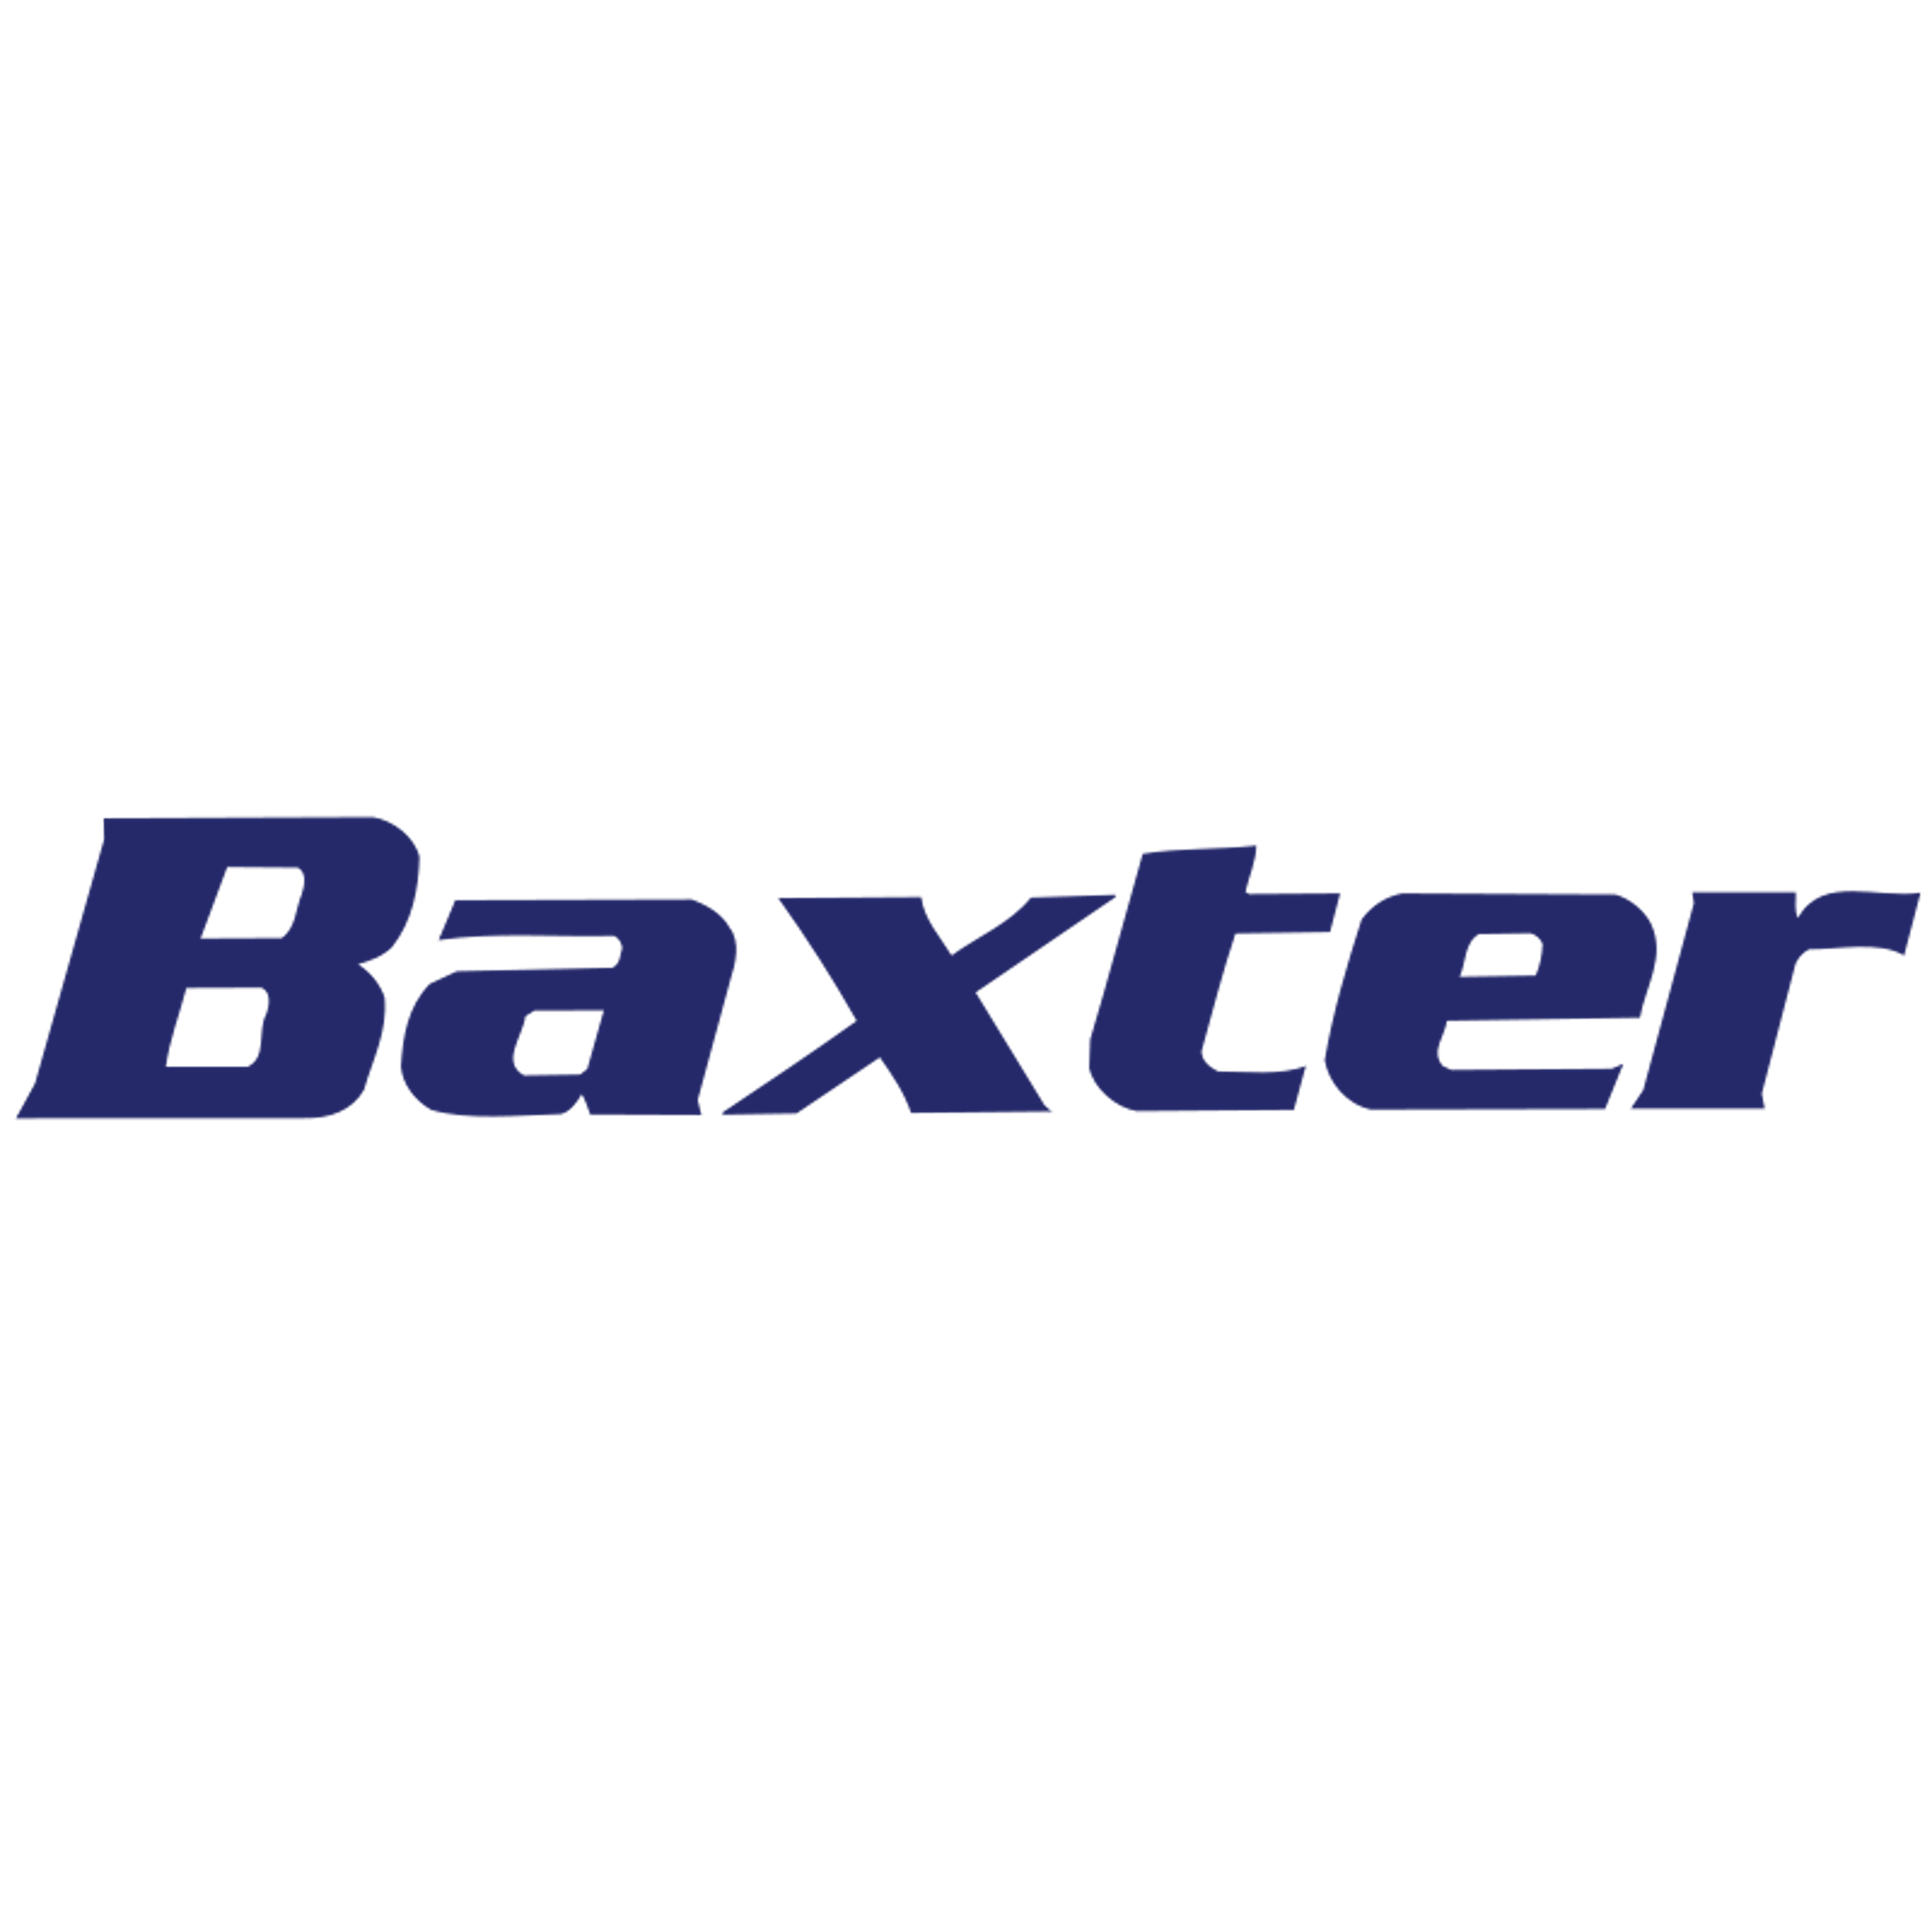 Equiptrack includes Baxter equipment